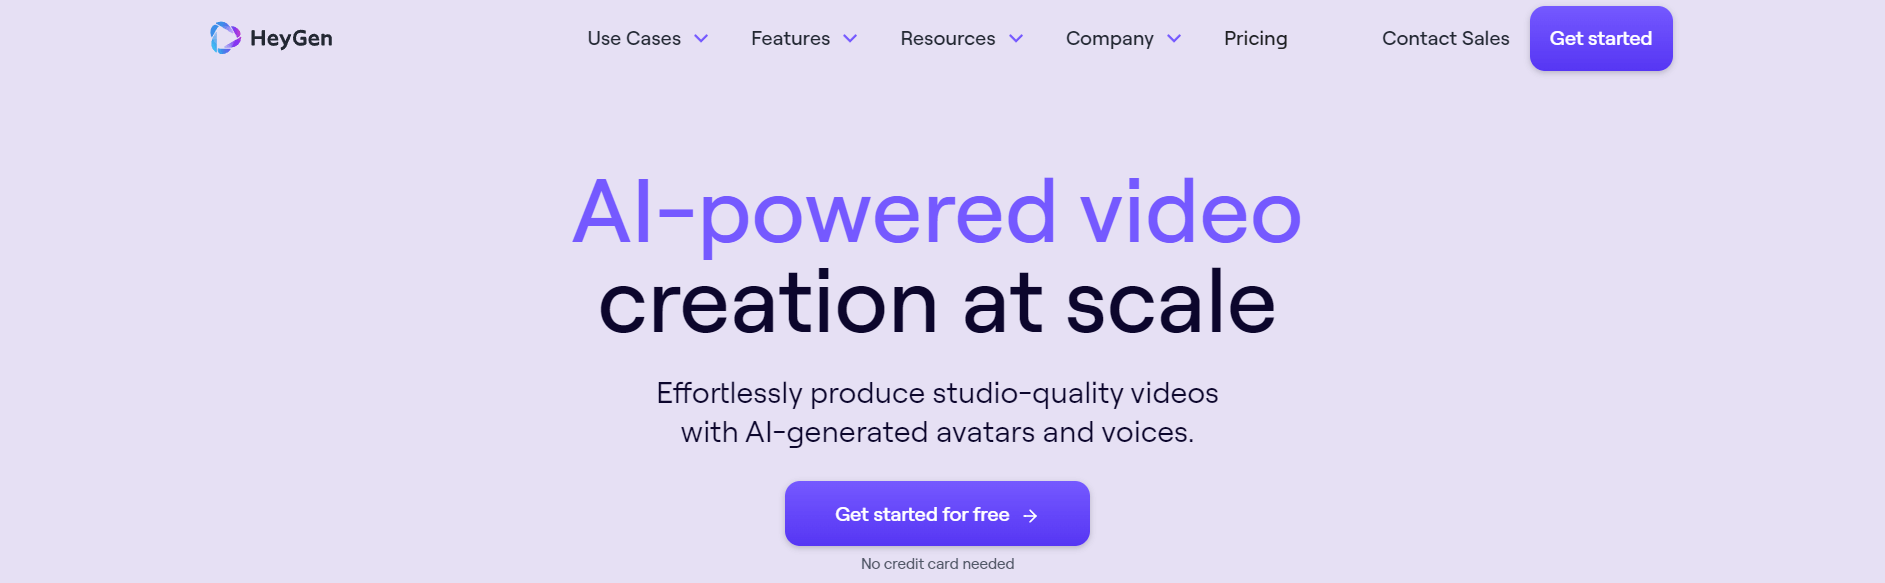 ai-powered-video-creation-at-scale-for-users-in-